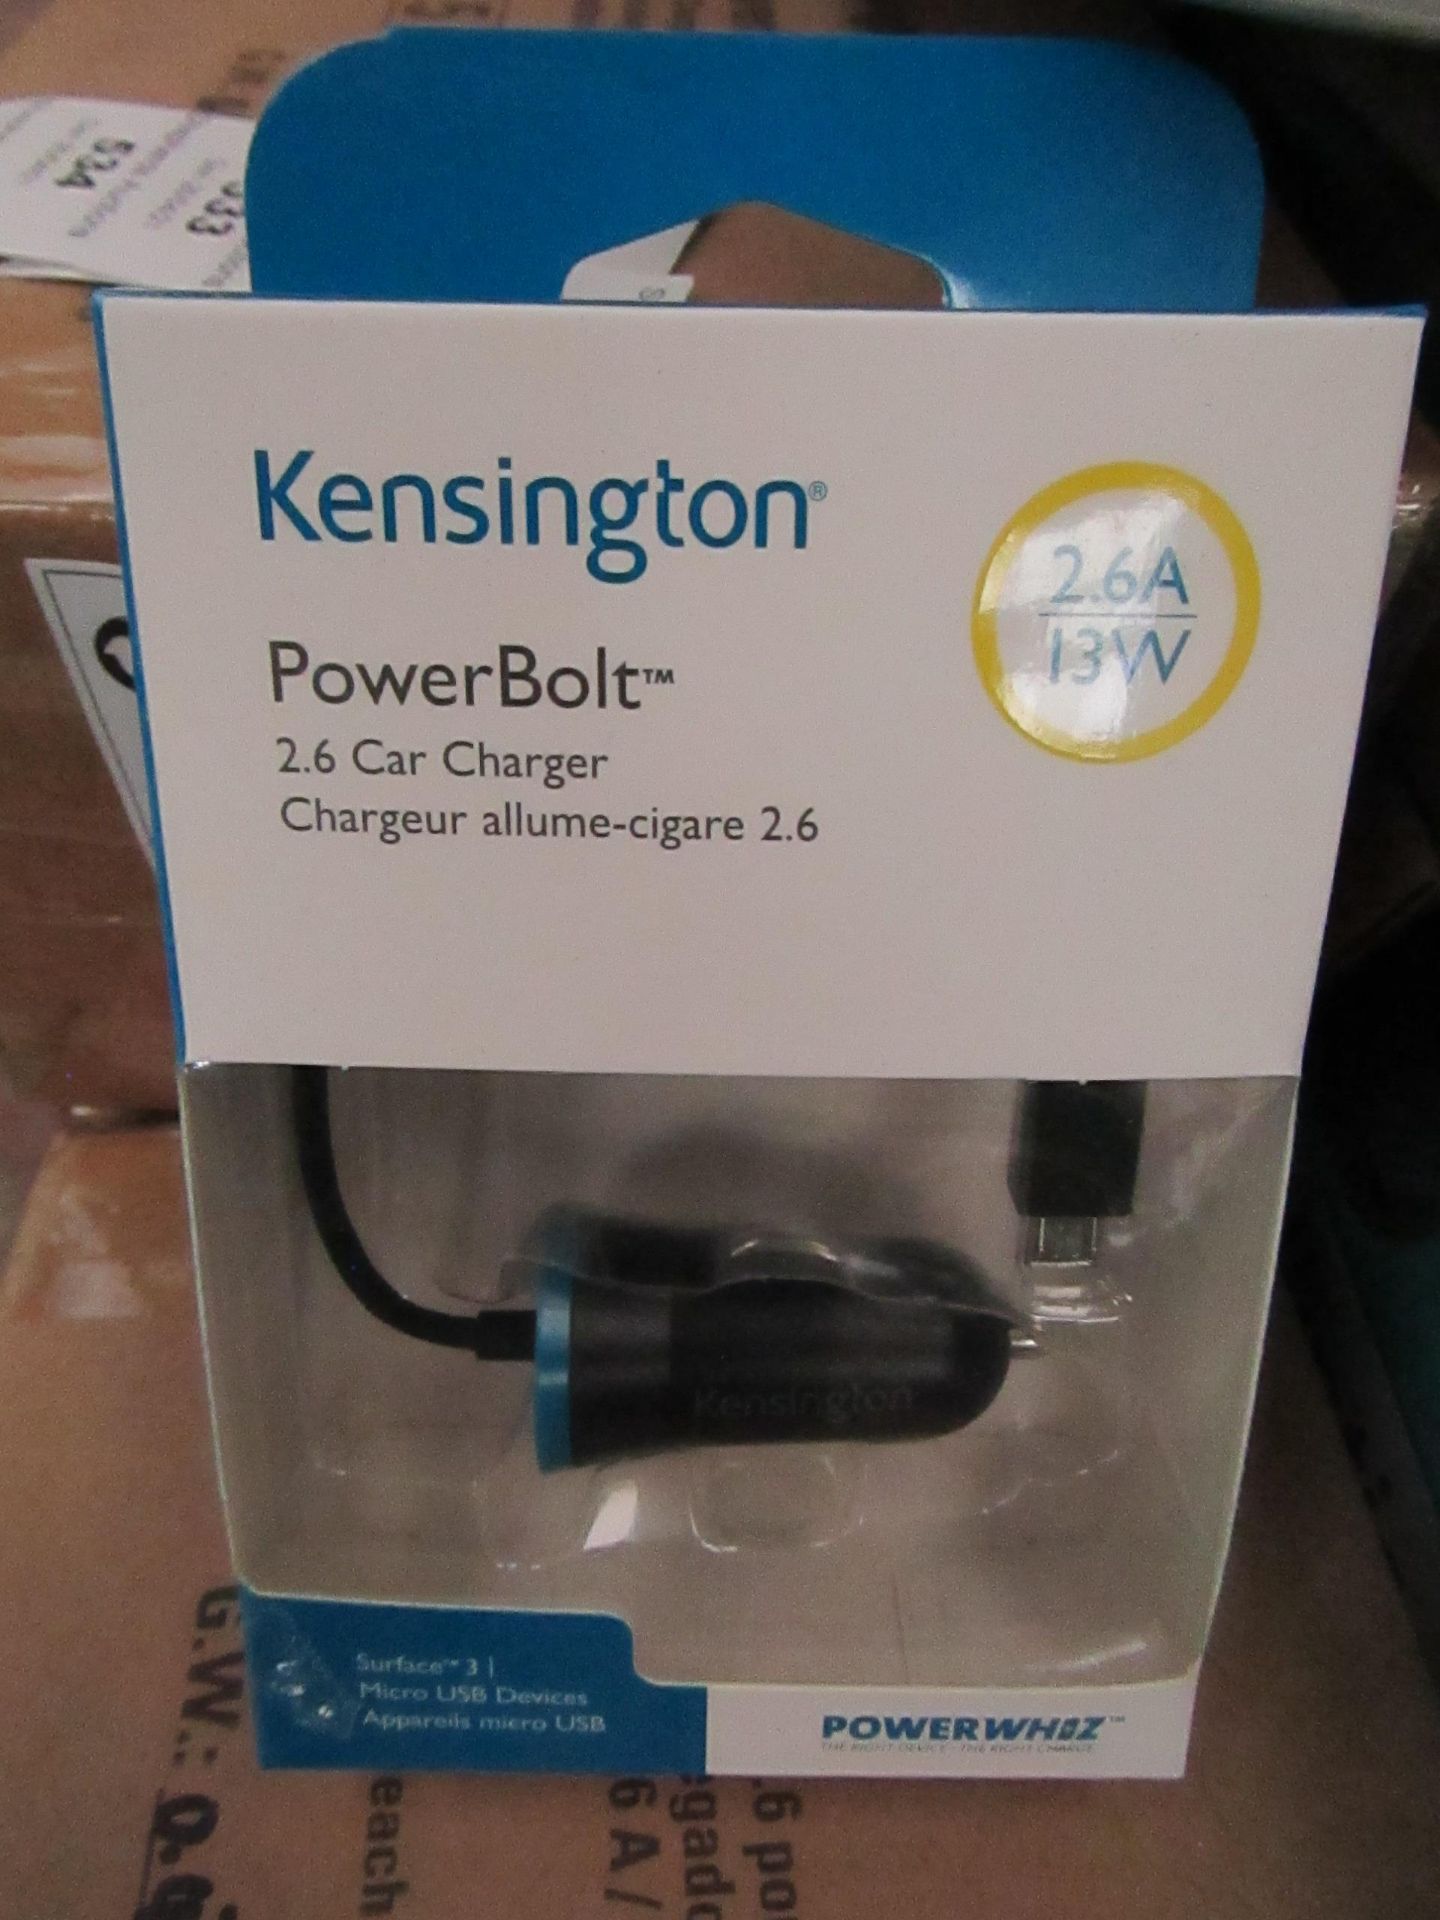 5x Kensington PowerBolt 2.4 Car Charger (made for iPod, iPhone & iPad) - New & Boxed.